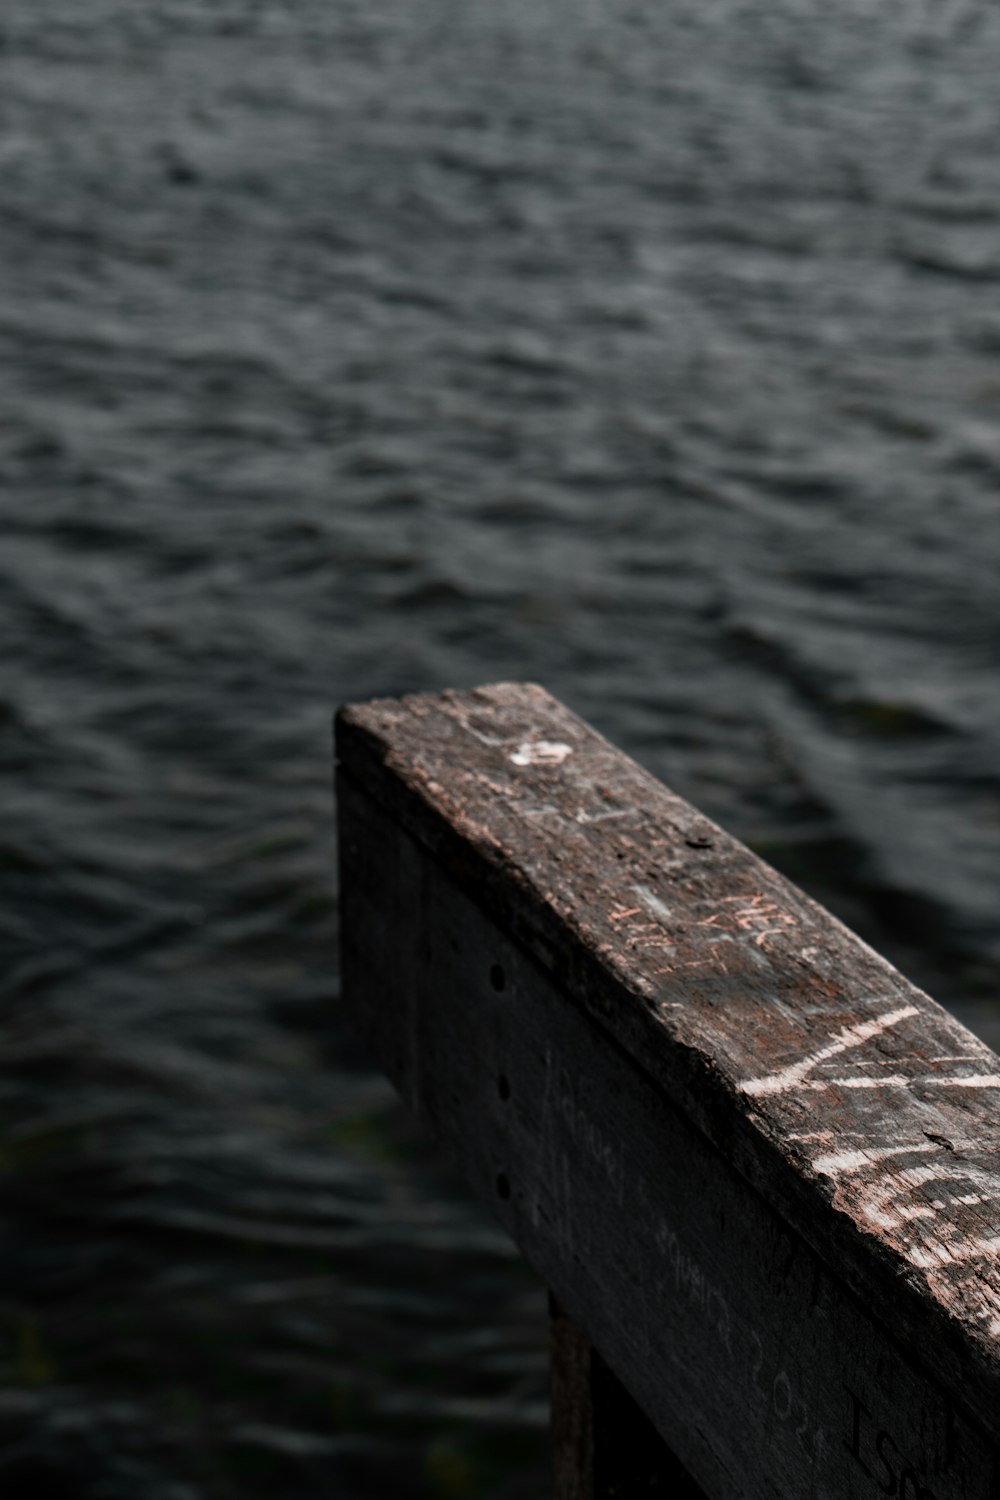 a seagull sitting on top of a wooden dock next to a body of